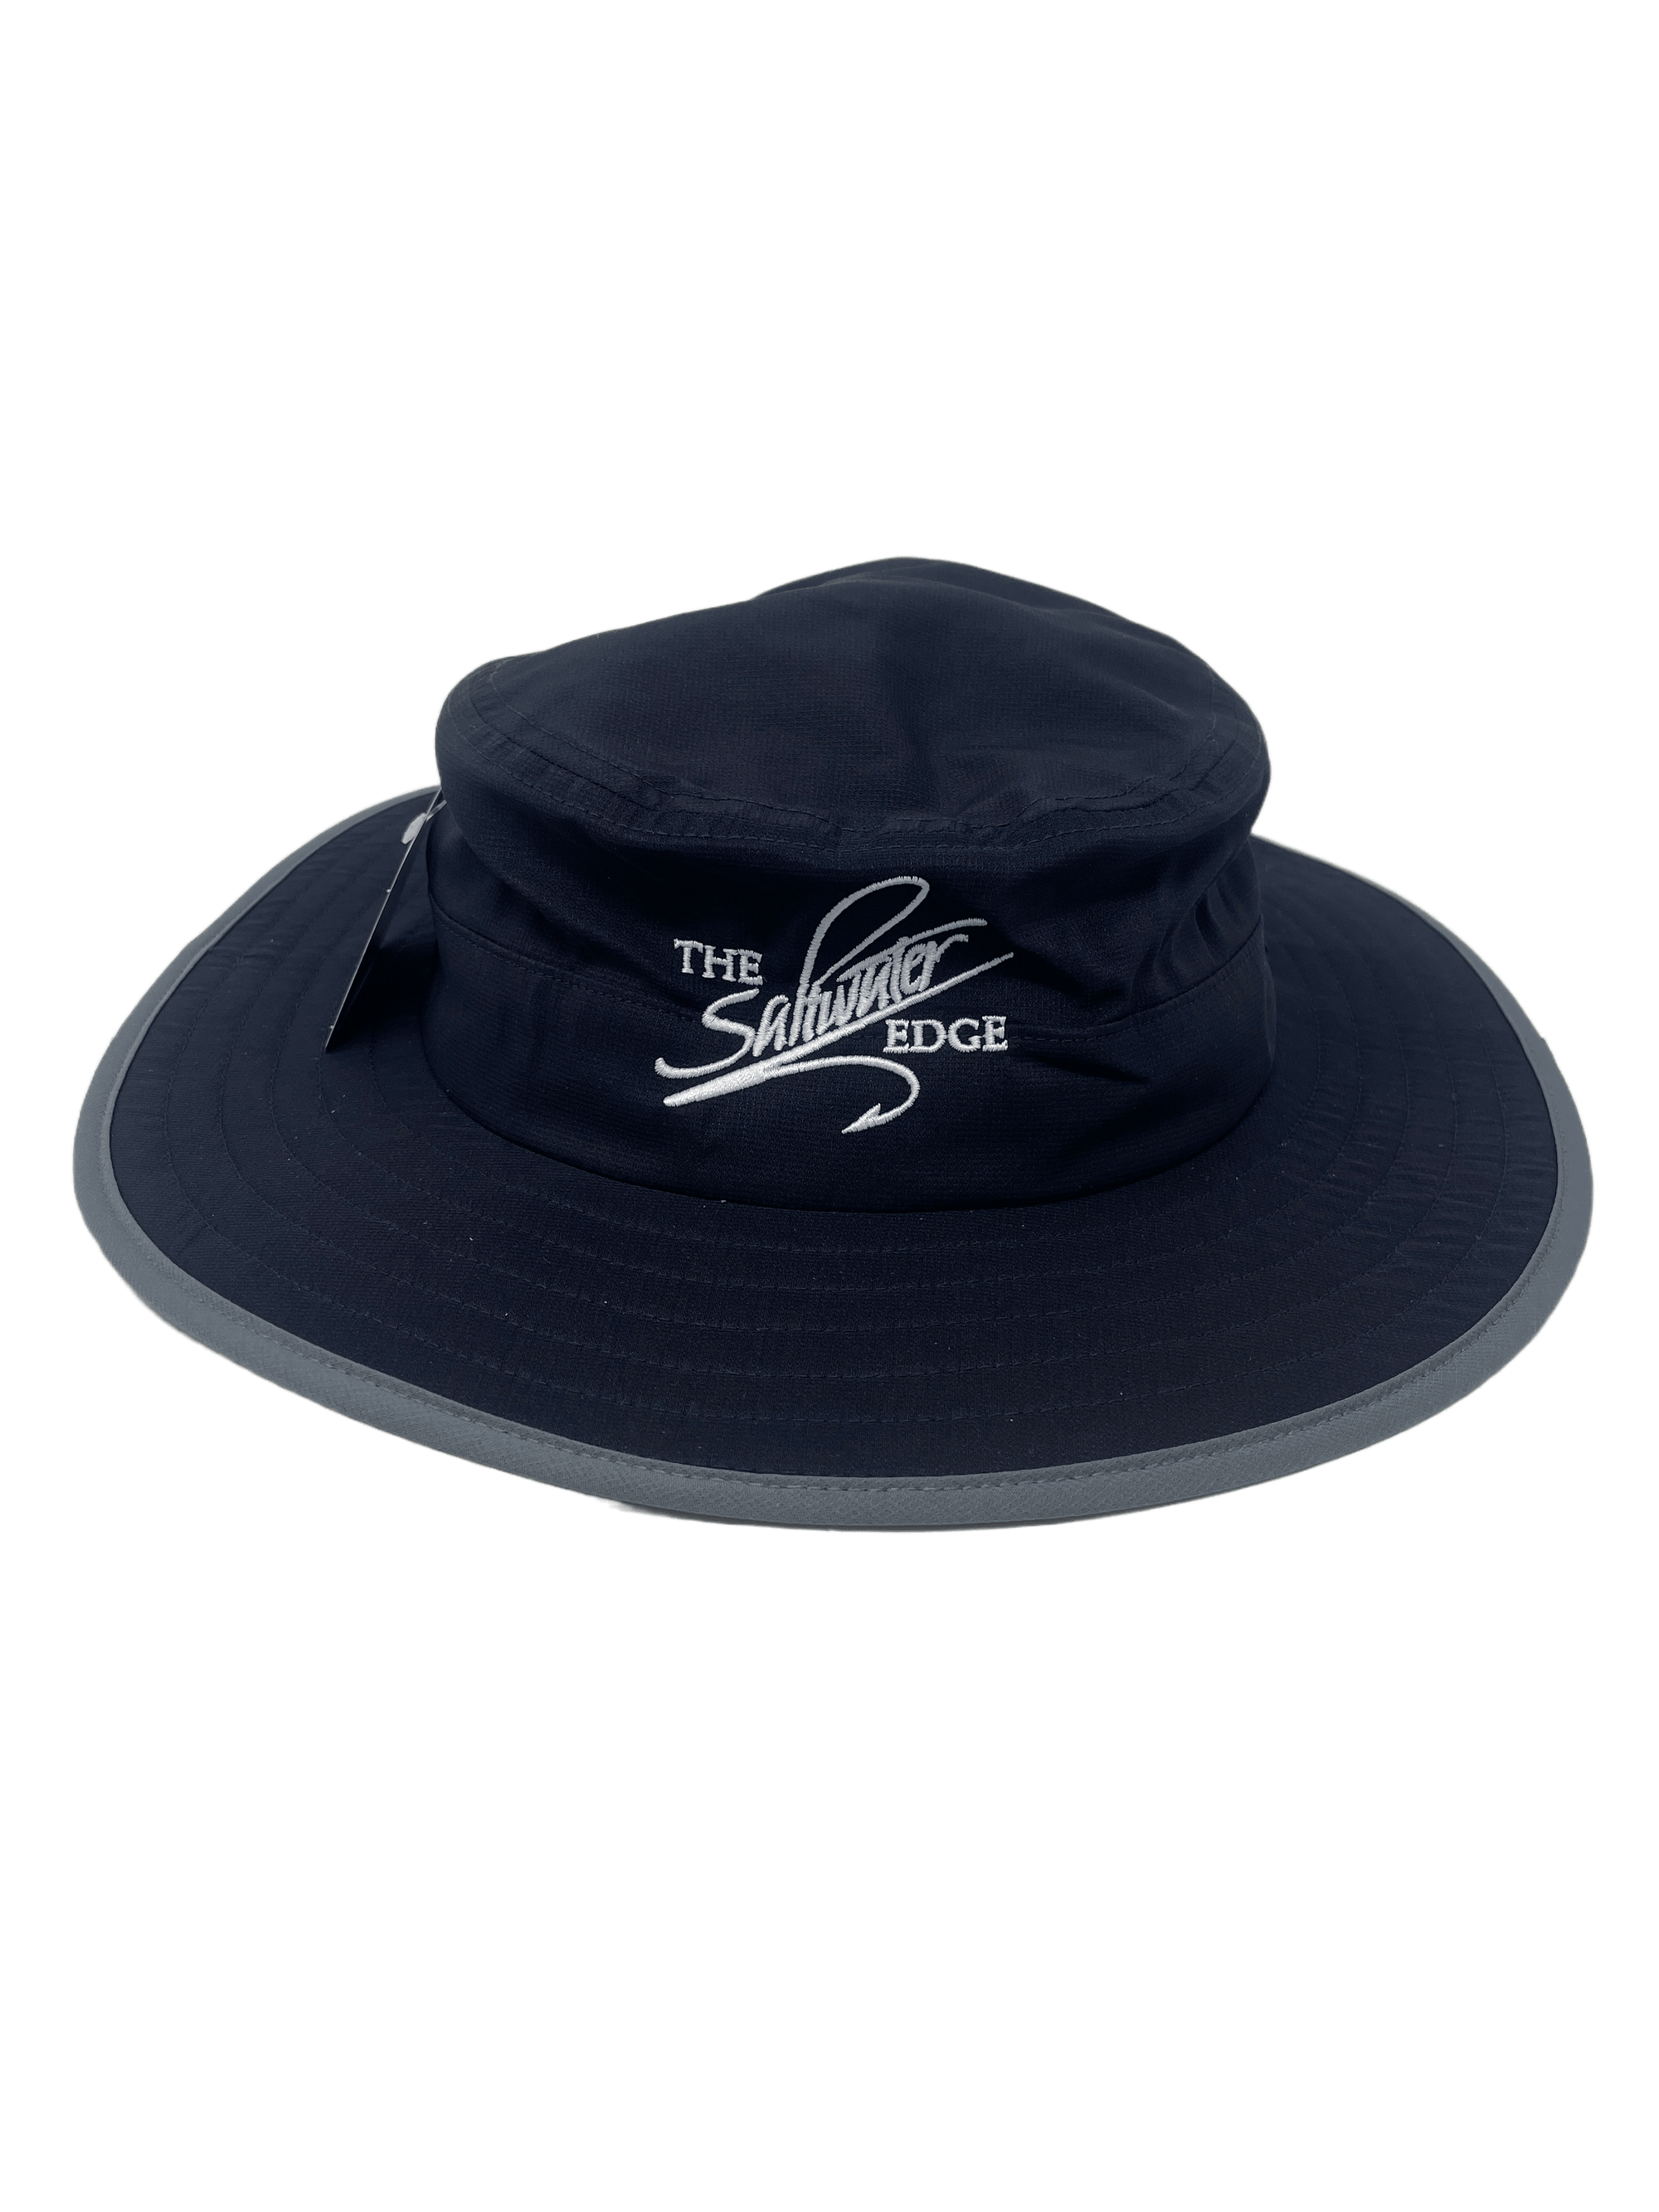 Fishing Hats, Caps & Headwear for Saltwater Anglers – Page 2 – Fathom  Offshore